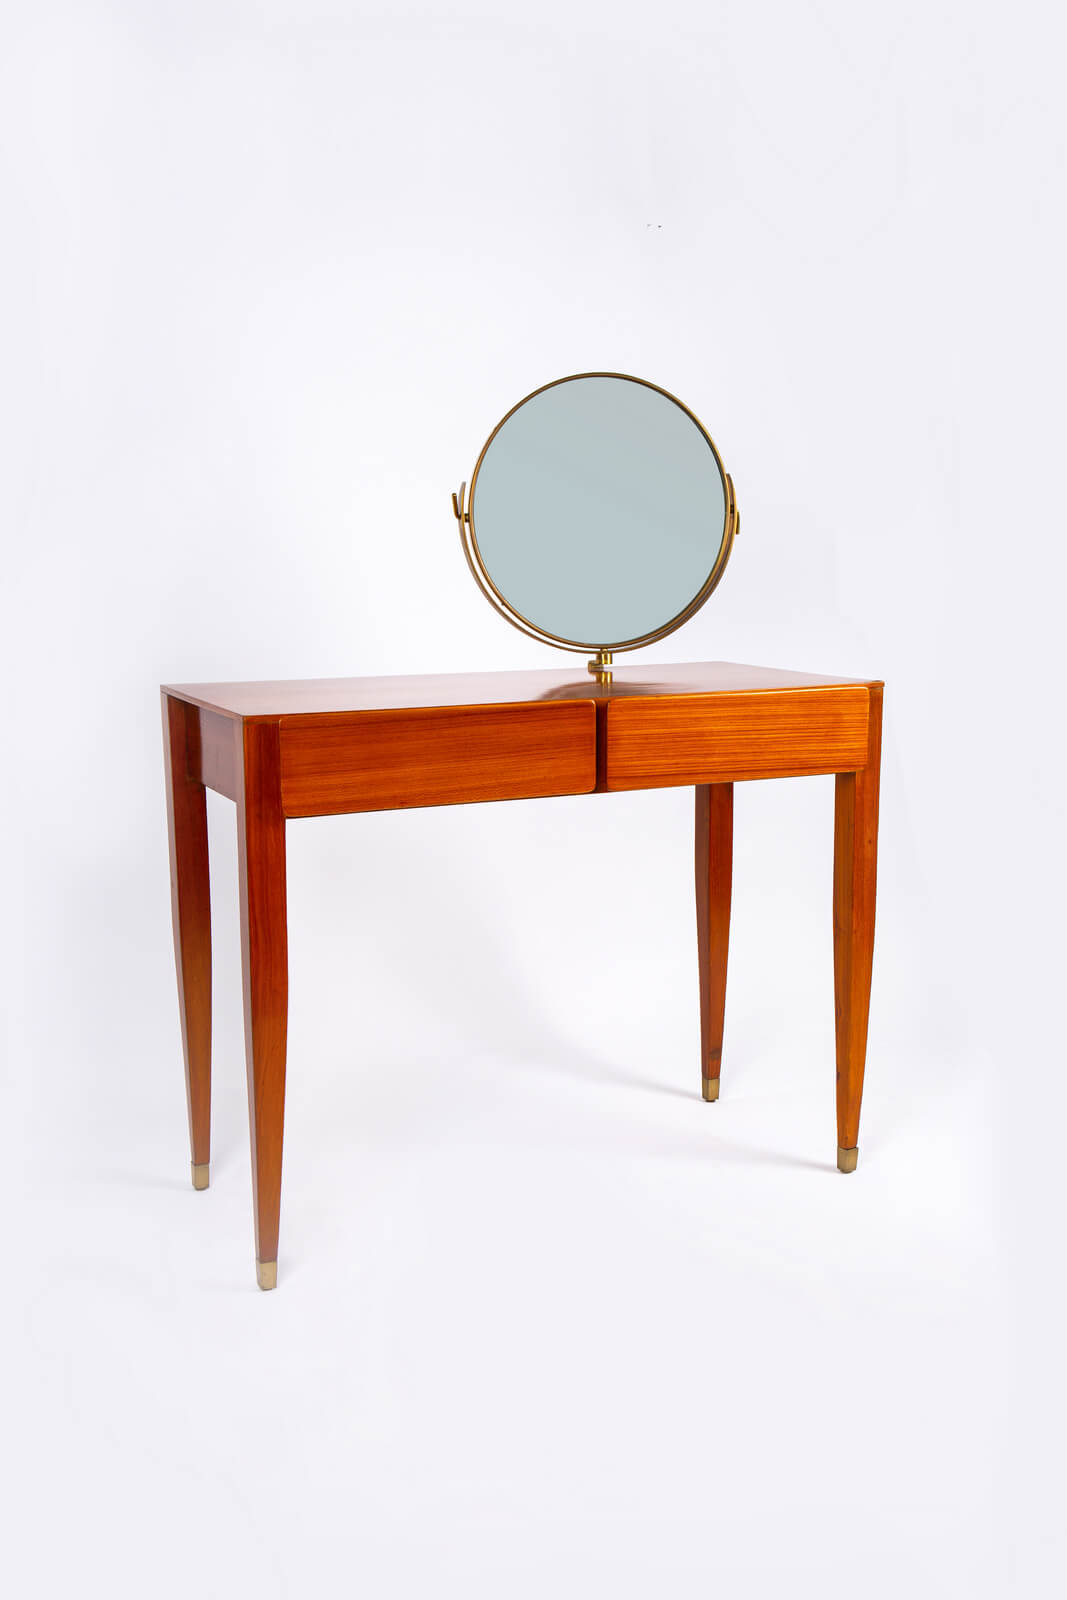 Table by Gio Ponti for sale